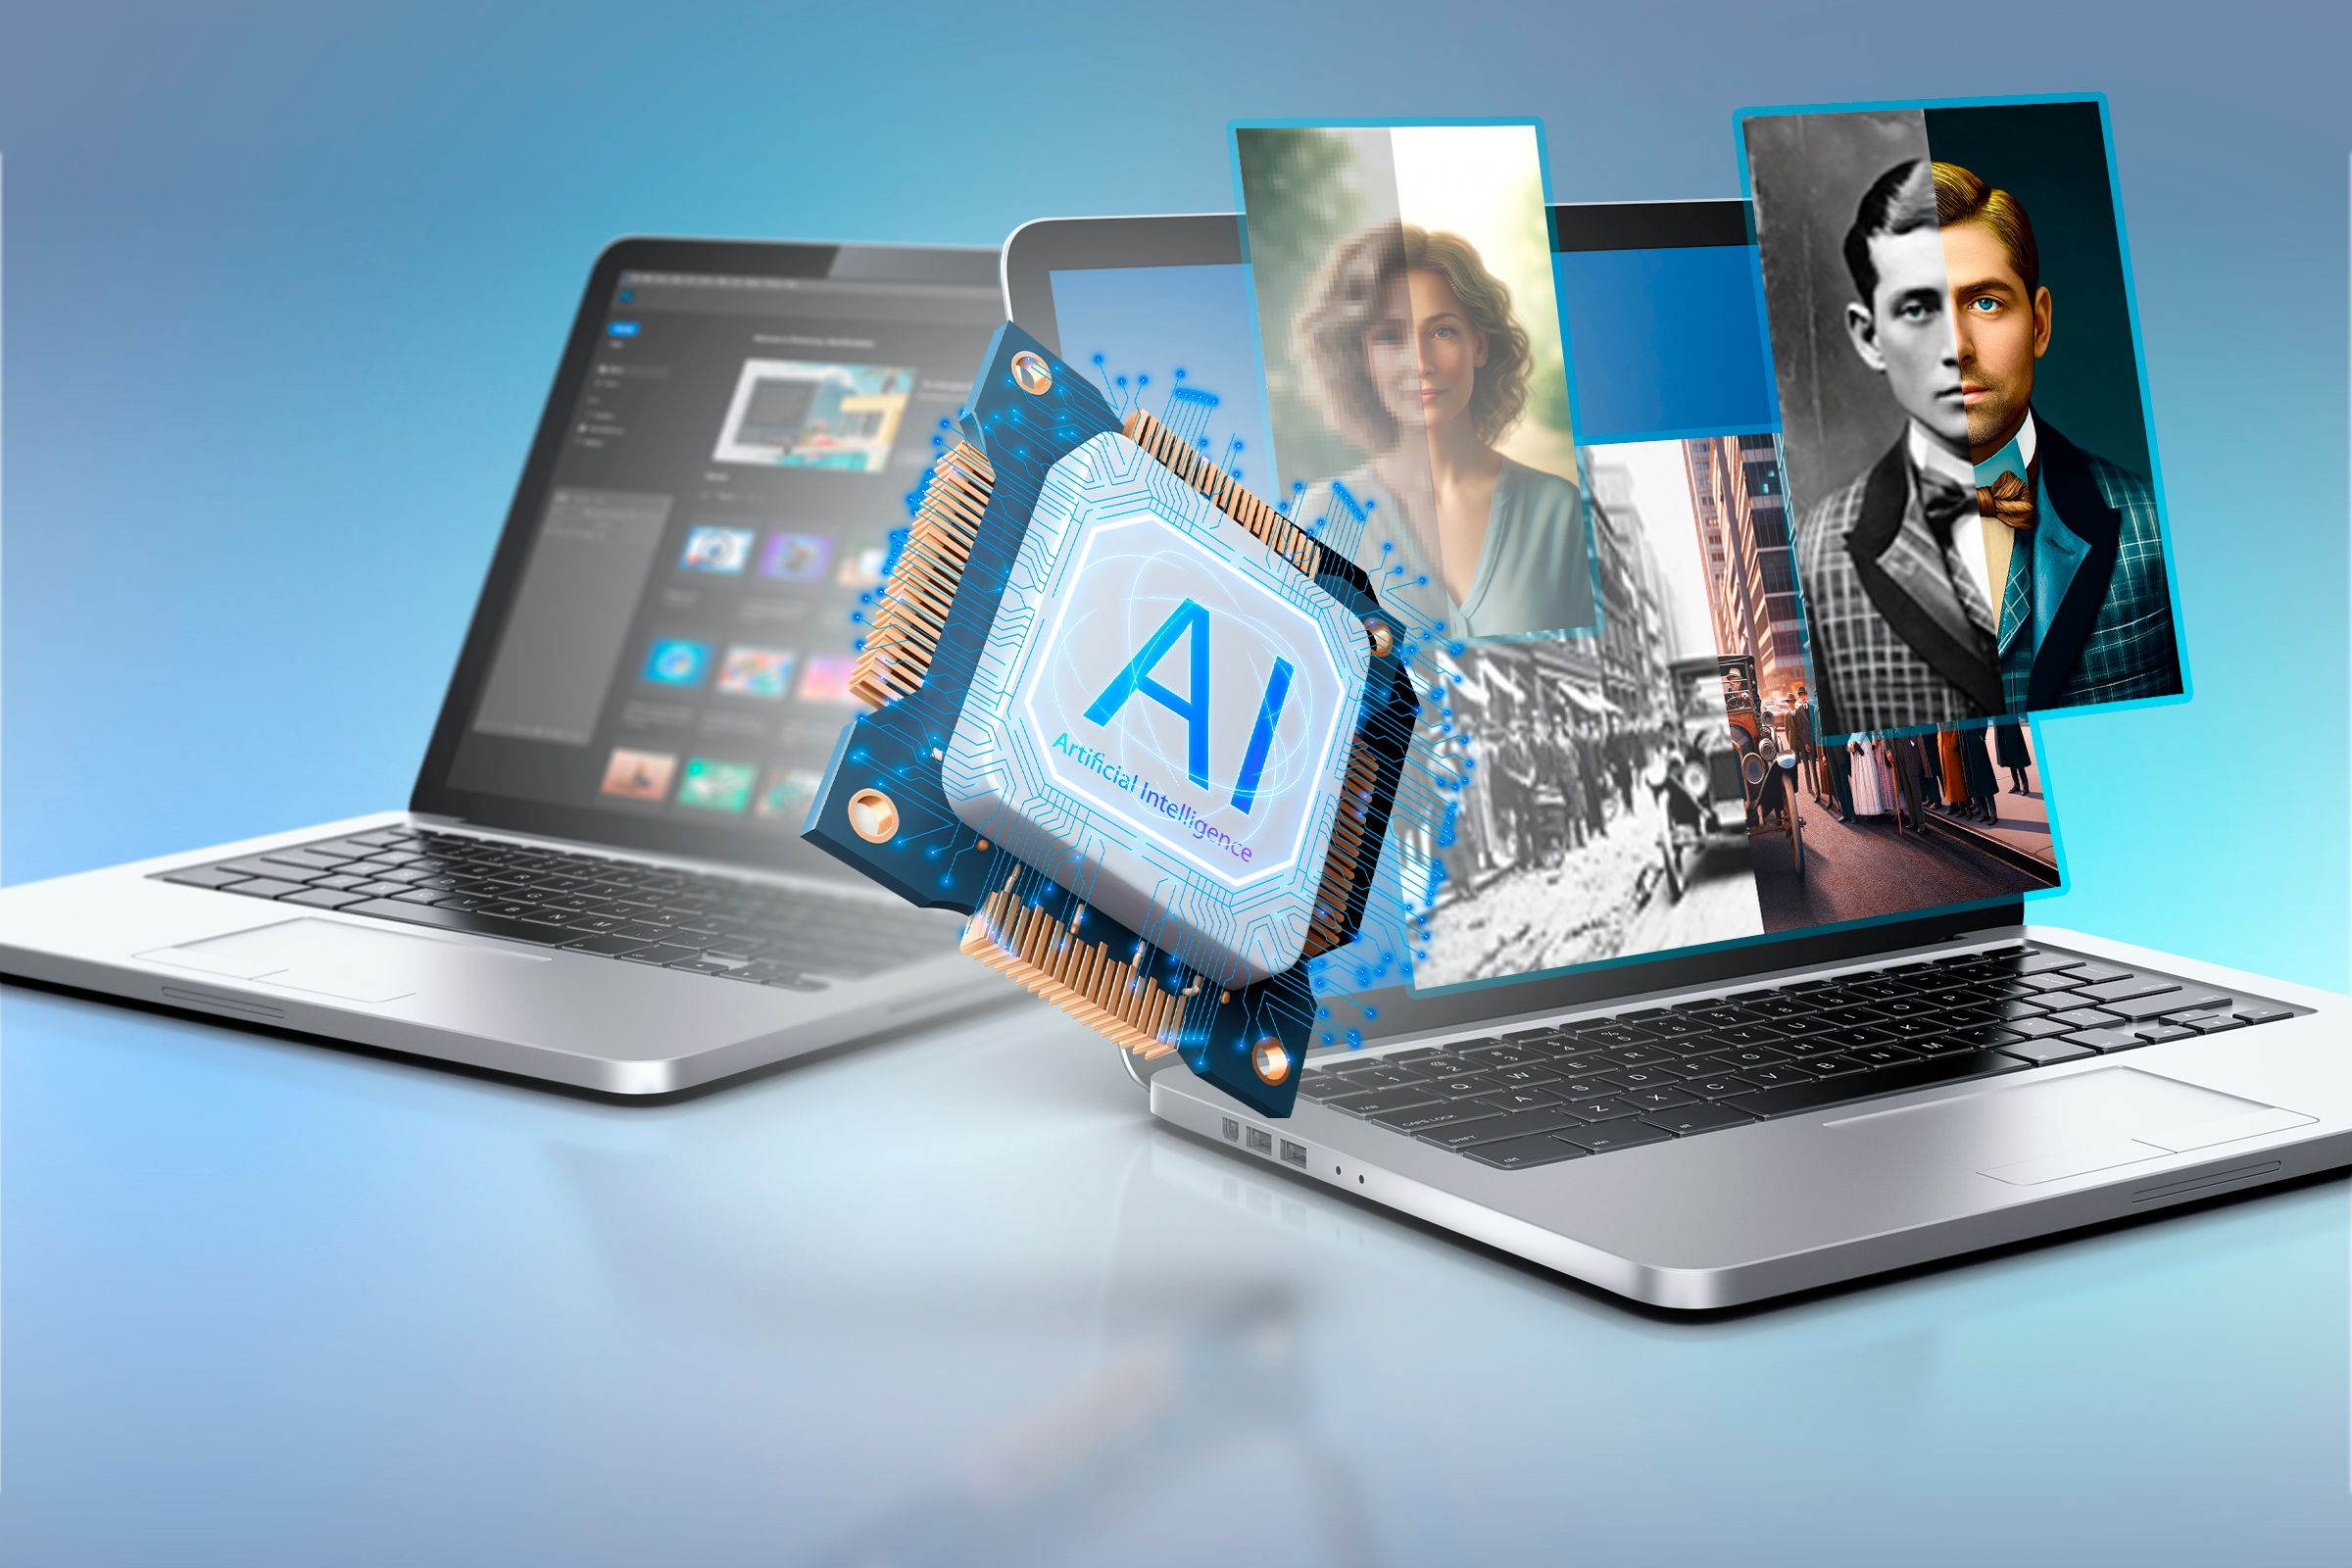 An artificial intelligence chip in the center and two laptops in the background, one with Photoshop open and the other showing some restored images.